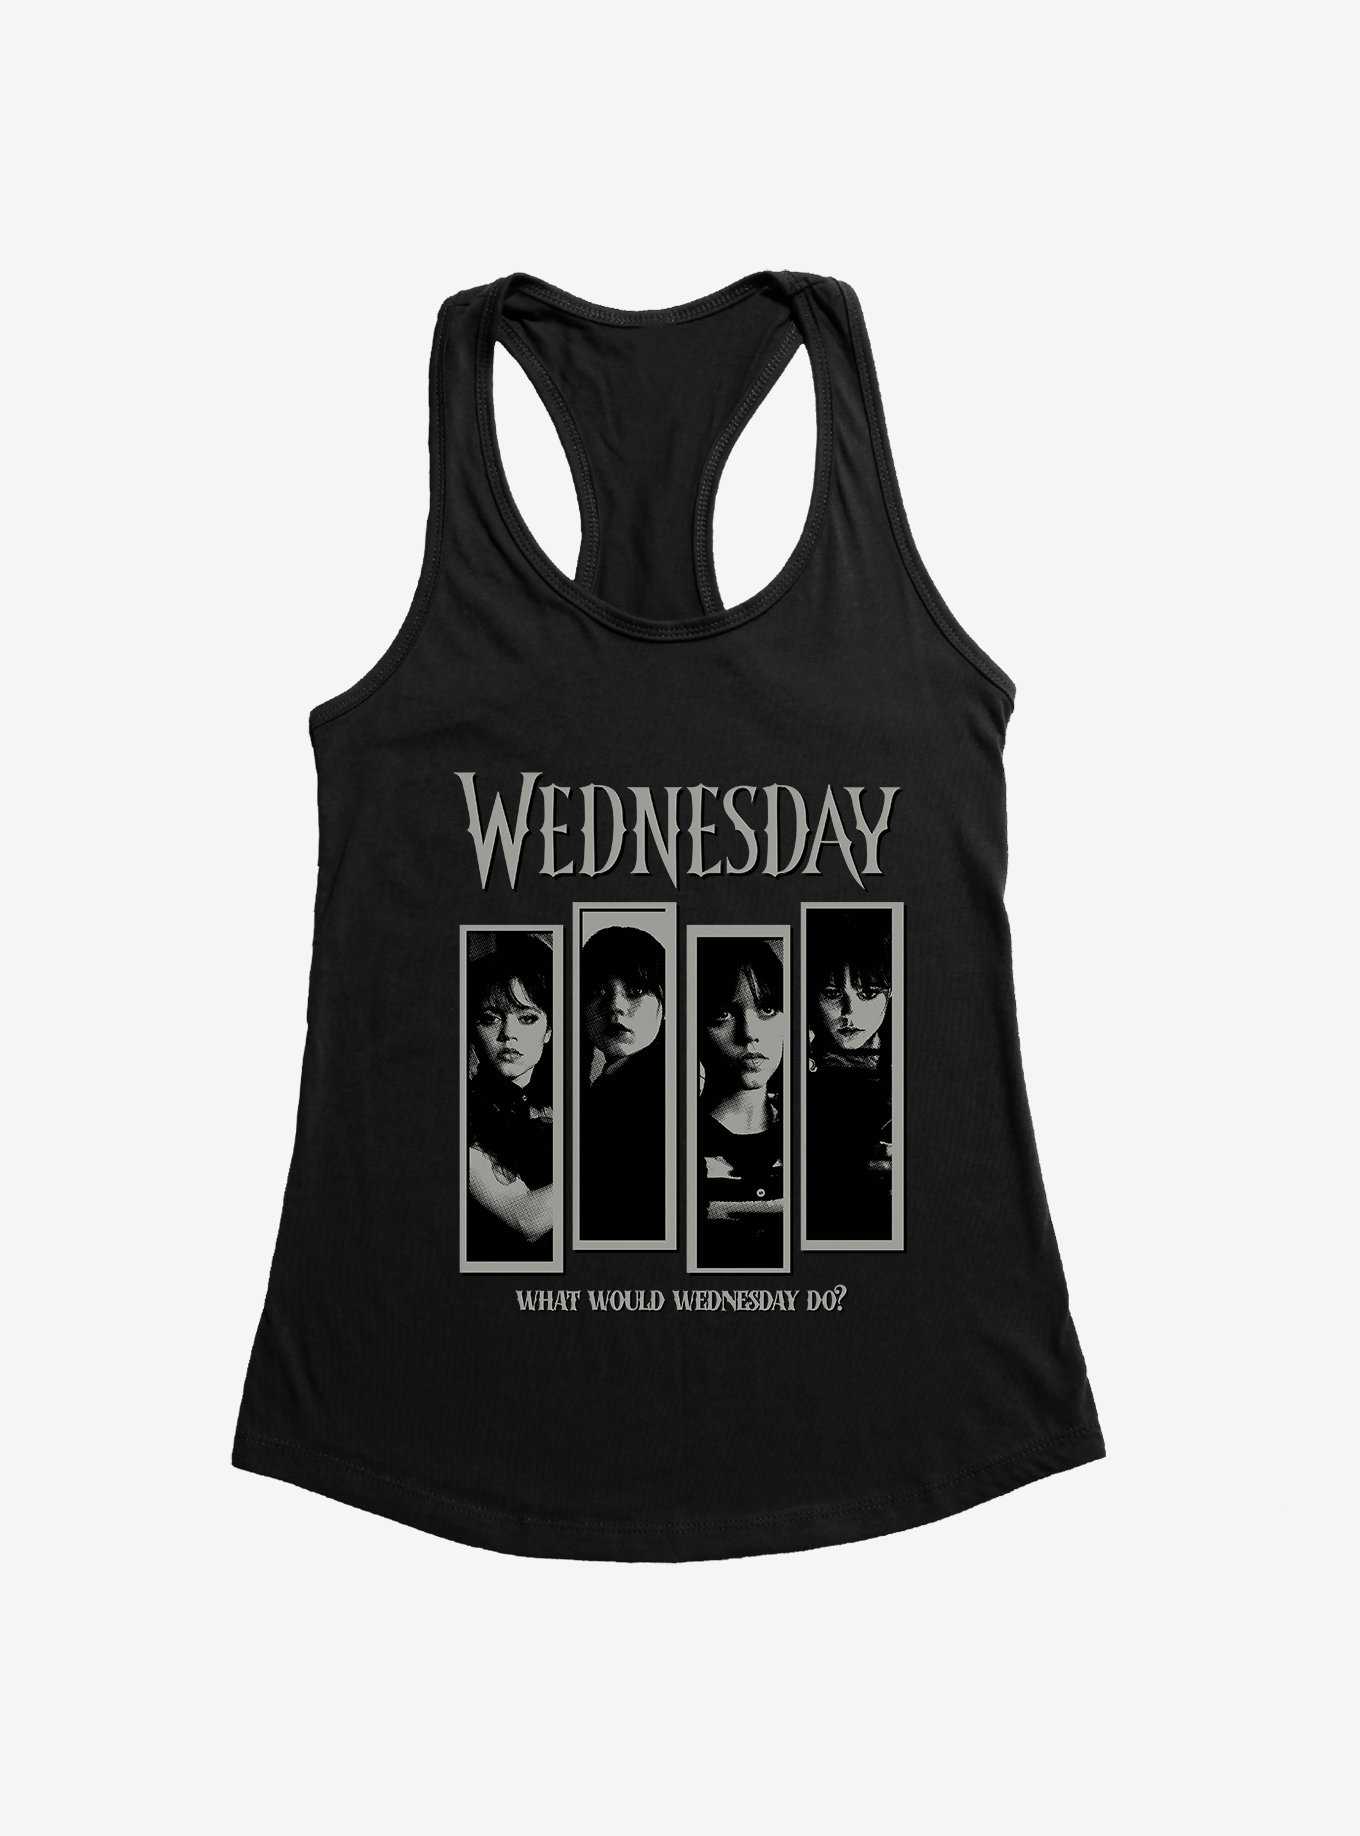 Wednesday What Would Wednesday Do? Panels Girls Tank, , hi-res